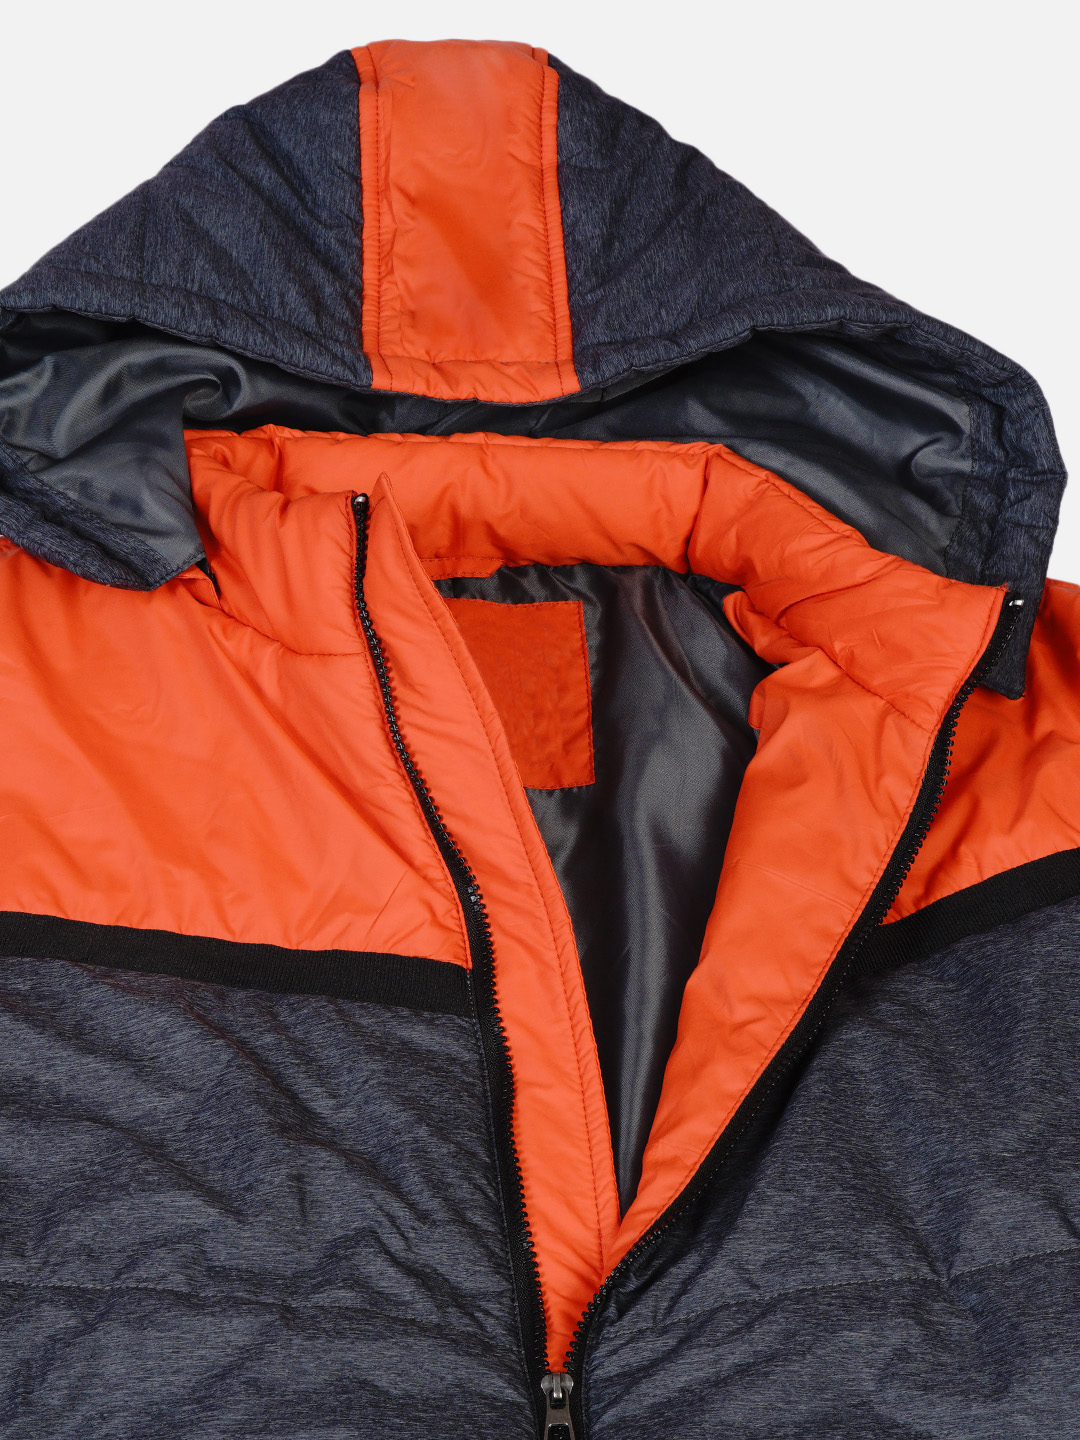 Colorblocked Jacket with Deatchable Hood